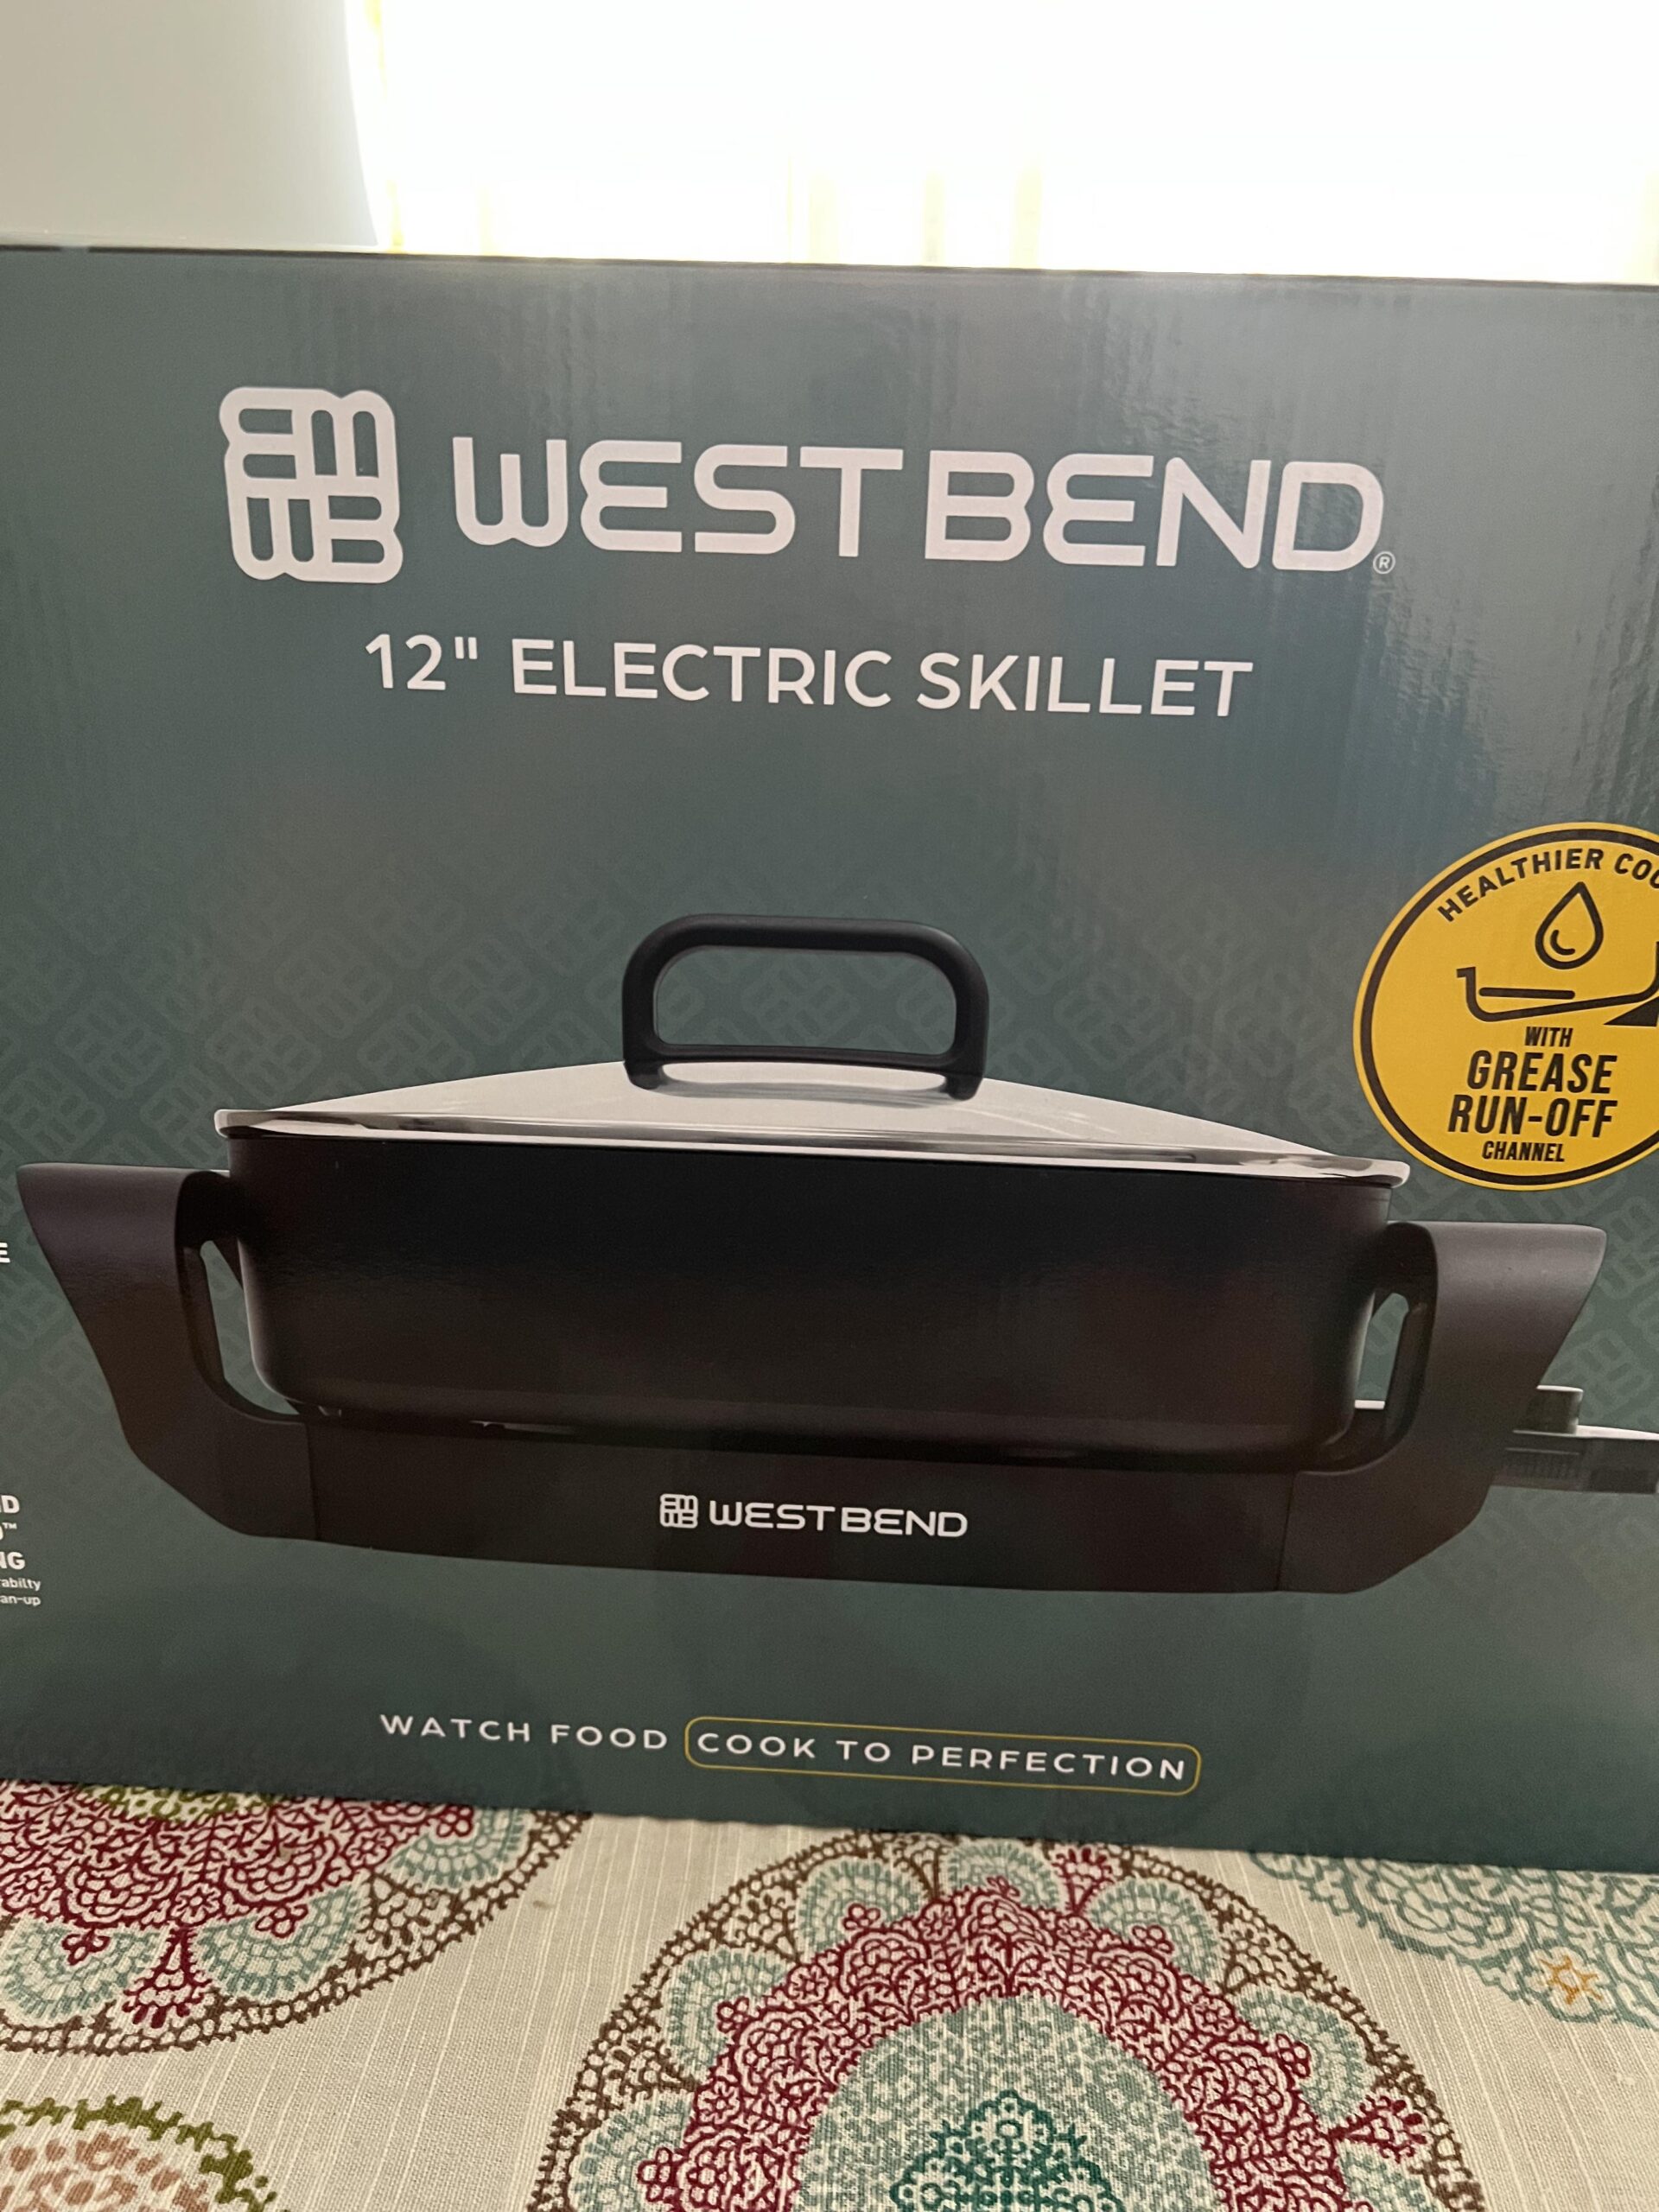 The Benefits of Using a West Bend Electric Skillet in Your Kitchen